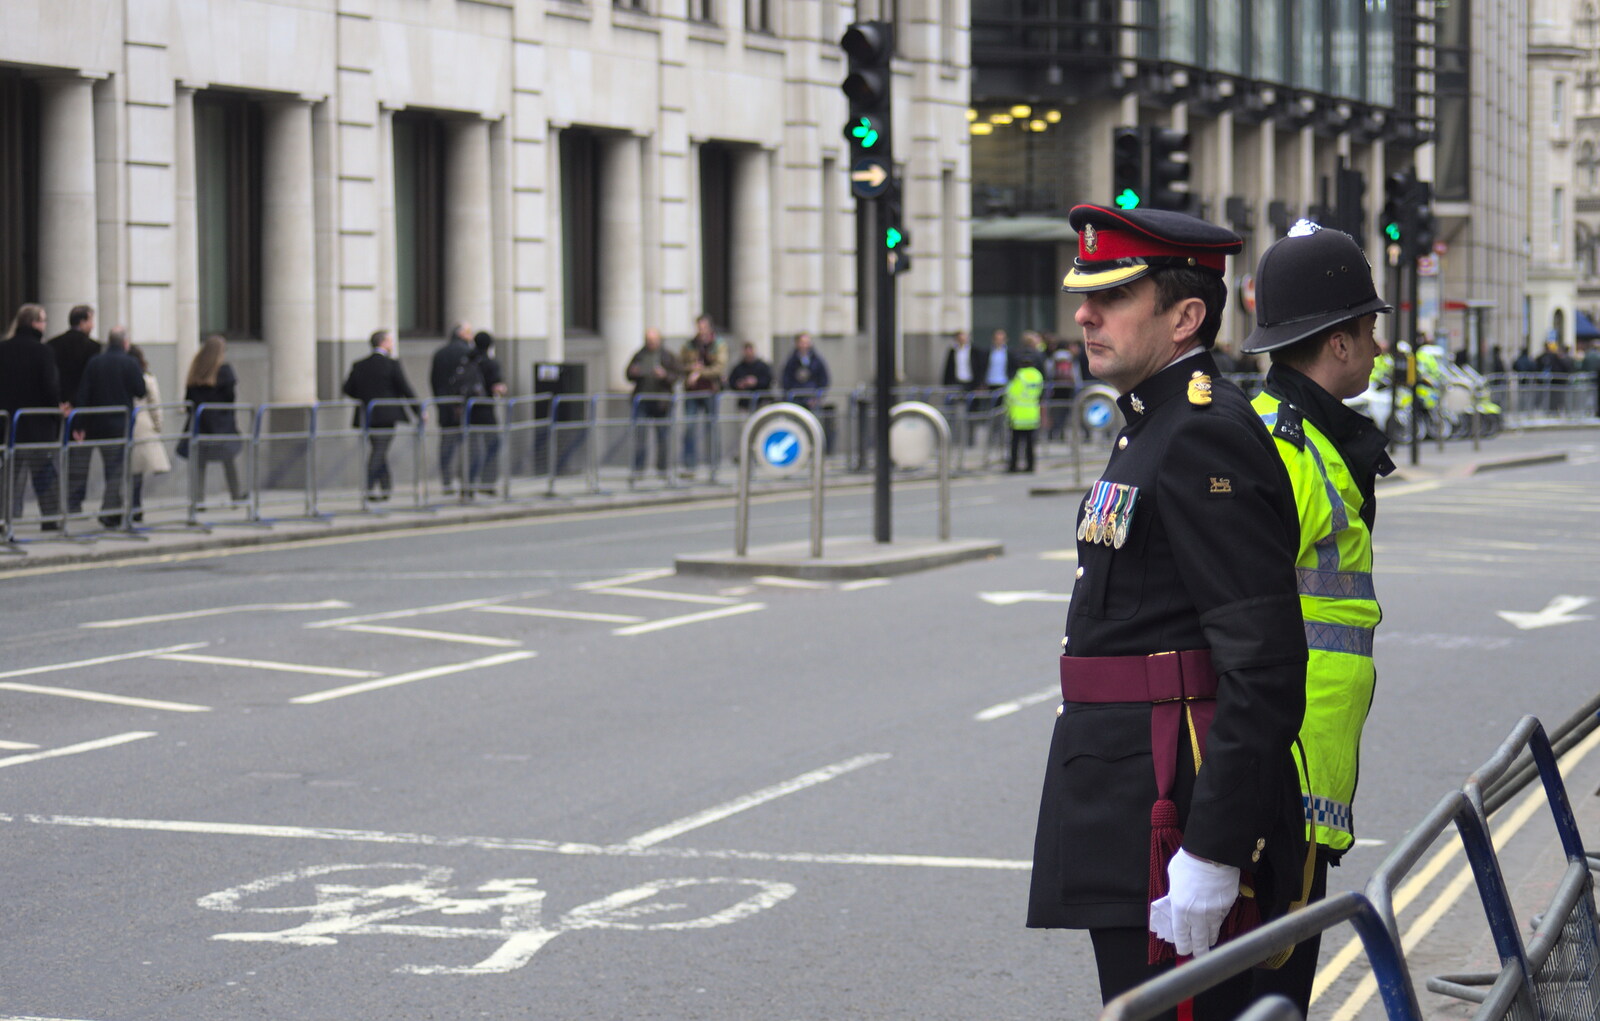 A military type and a rozzer, on Cannon Street from Margaret Thatcher's Funeral, St. Paul's, London - 17th April 2013